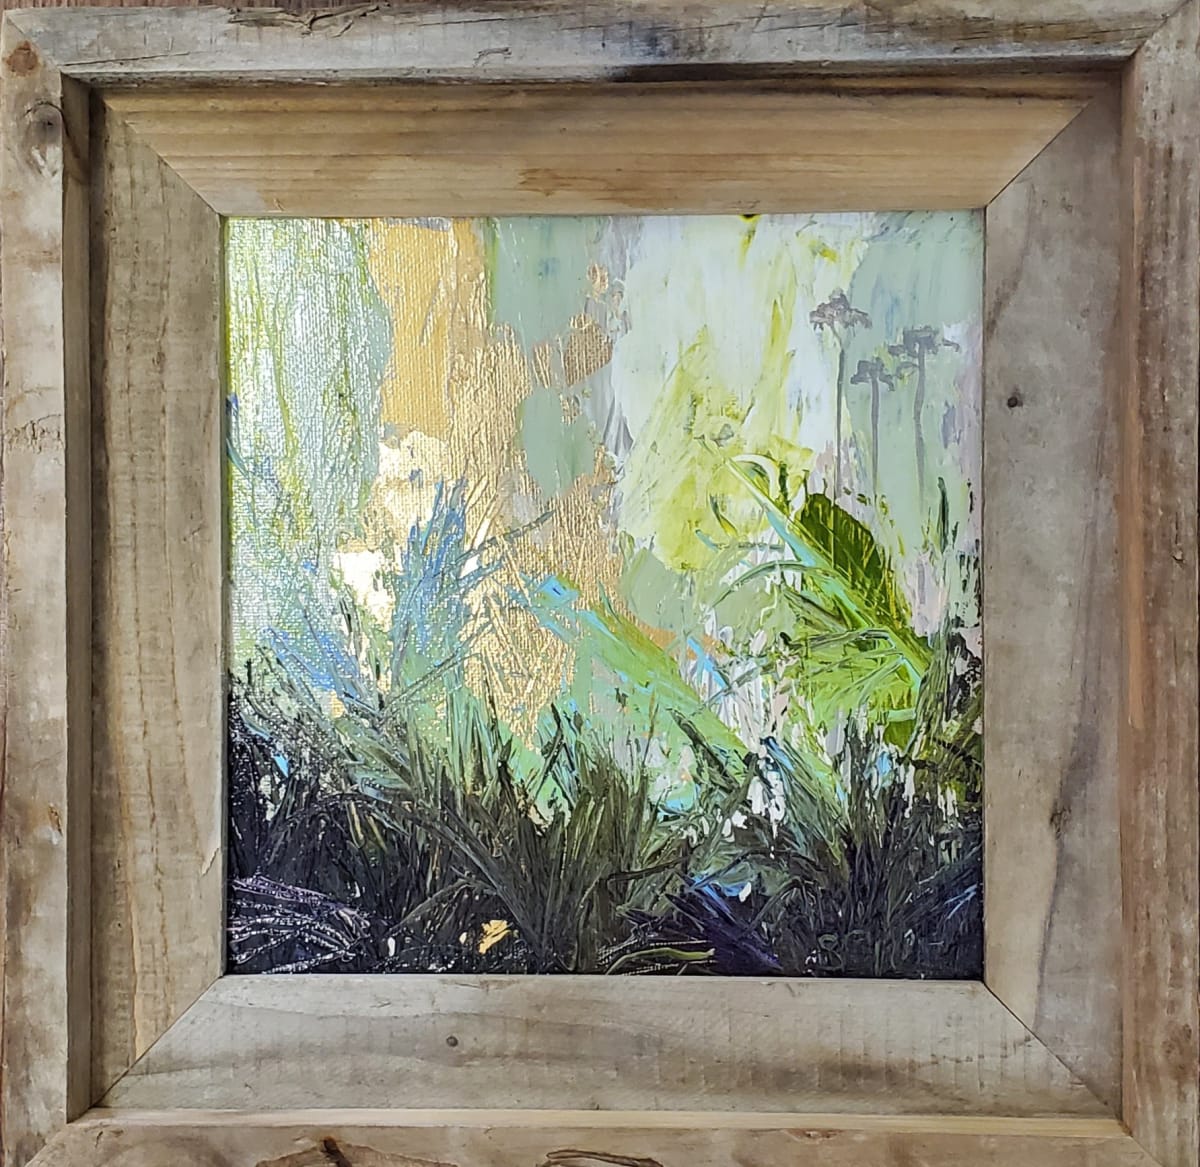 Catching Tadpoles by Jill Seiler  Image: Florida weedy garden series.  Combined with gold leaf and memories. 